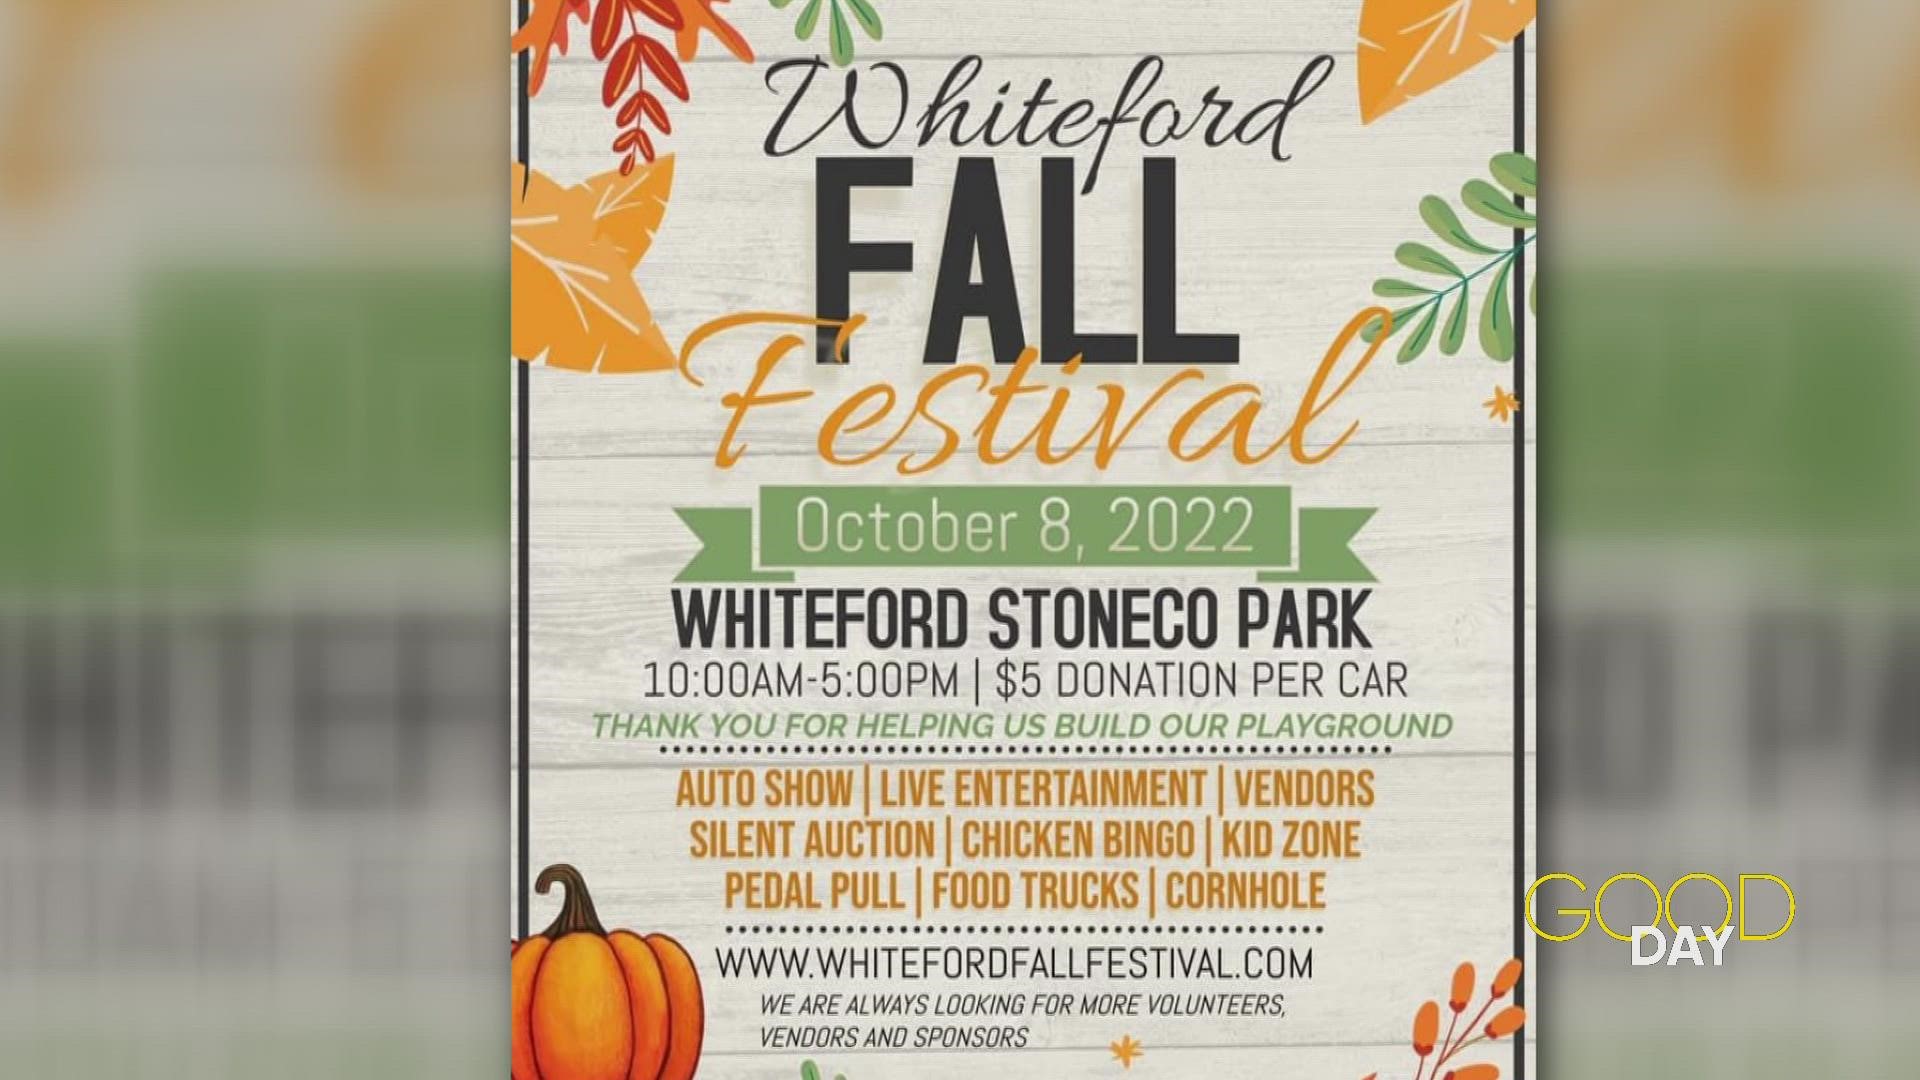 Visit the Whiteford Fall Festival Saturday from 10 a.m. to 5 p.m. to find out what chicken bingo is, and support a good cause.